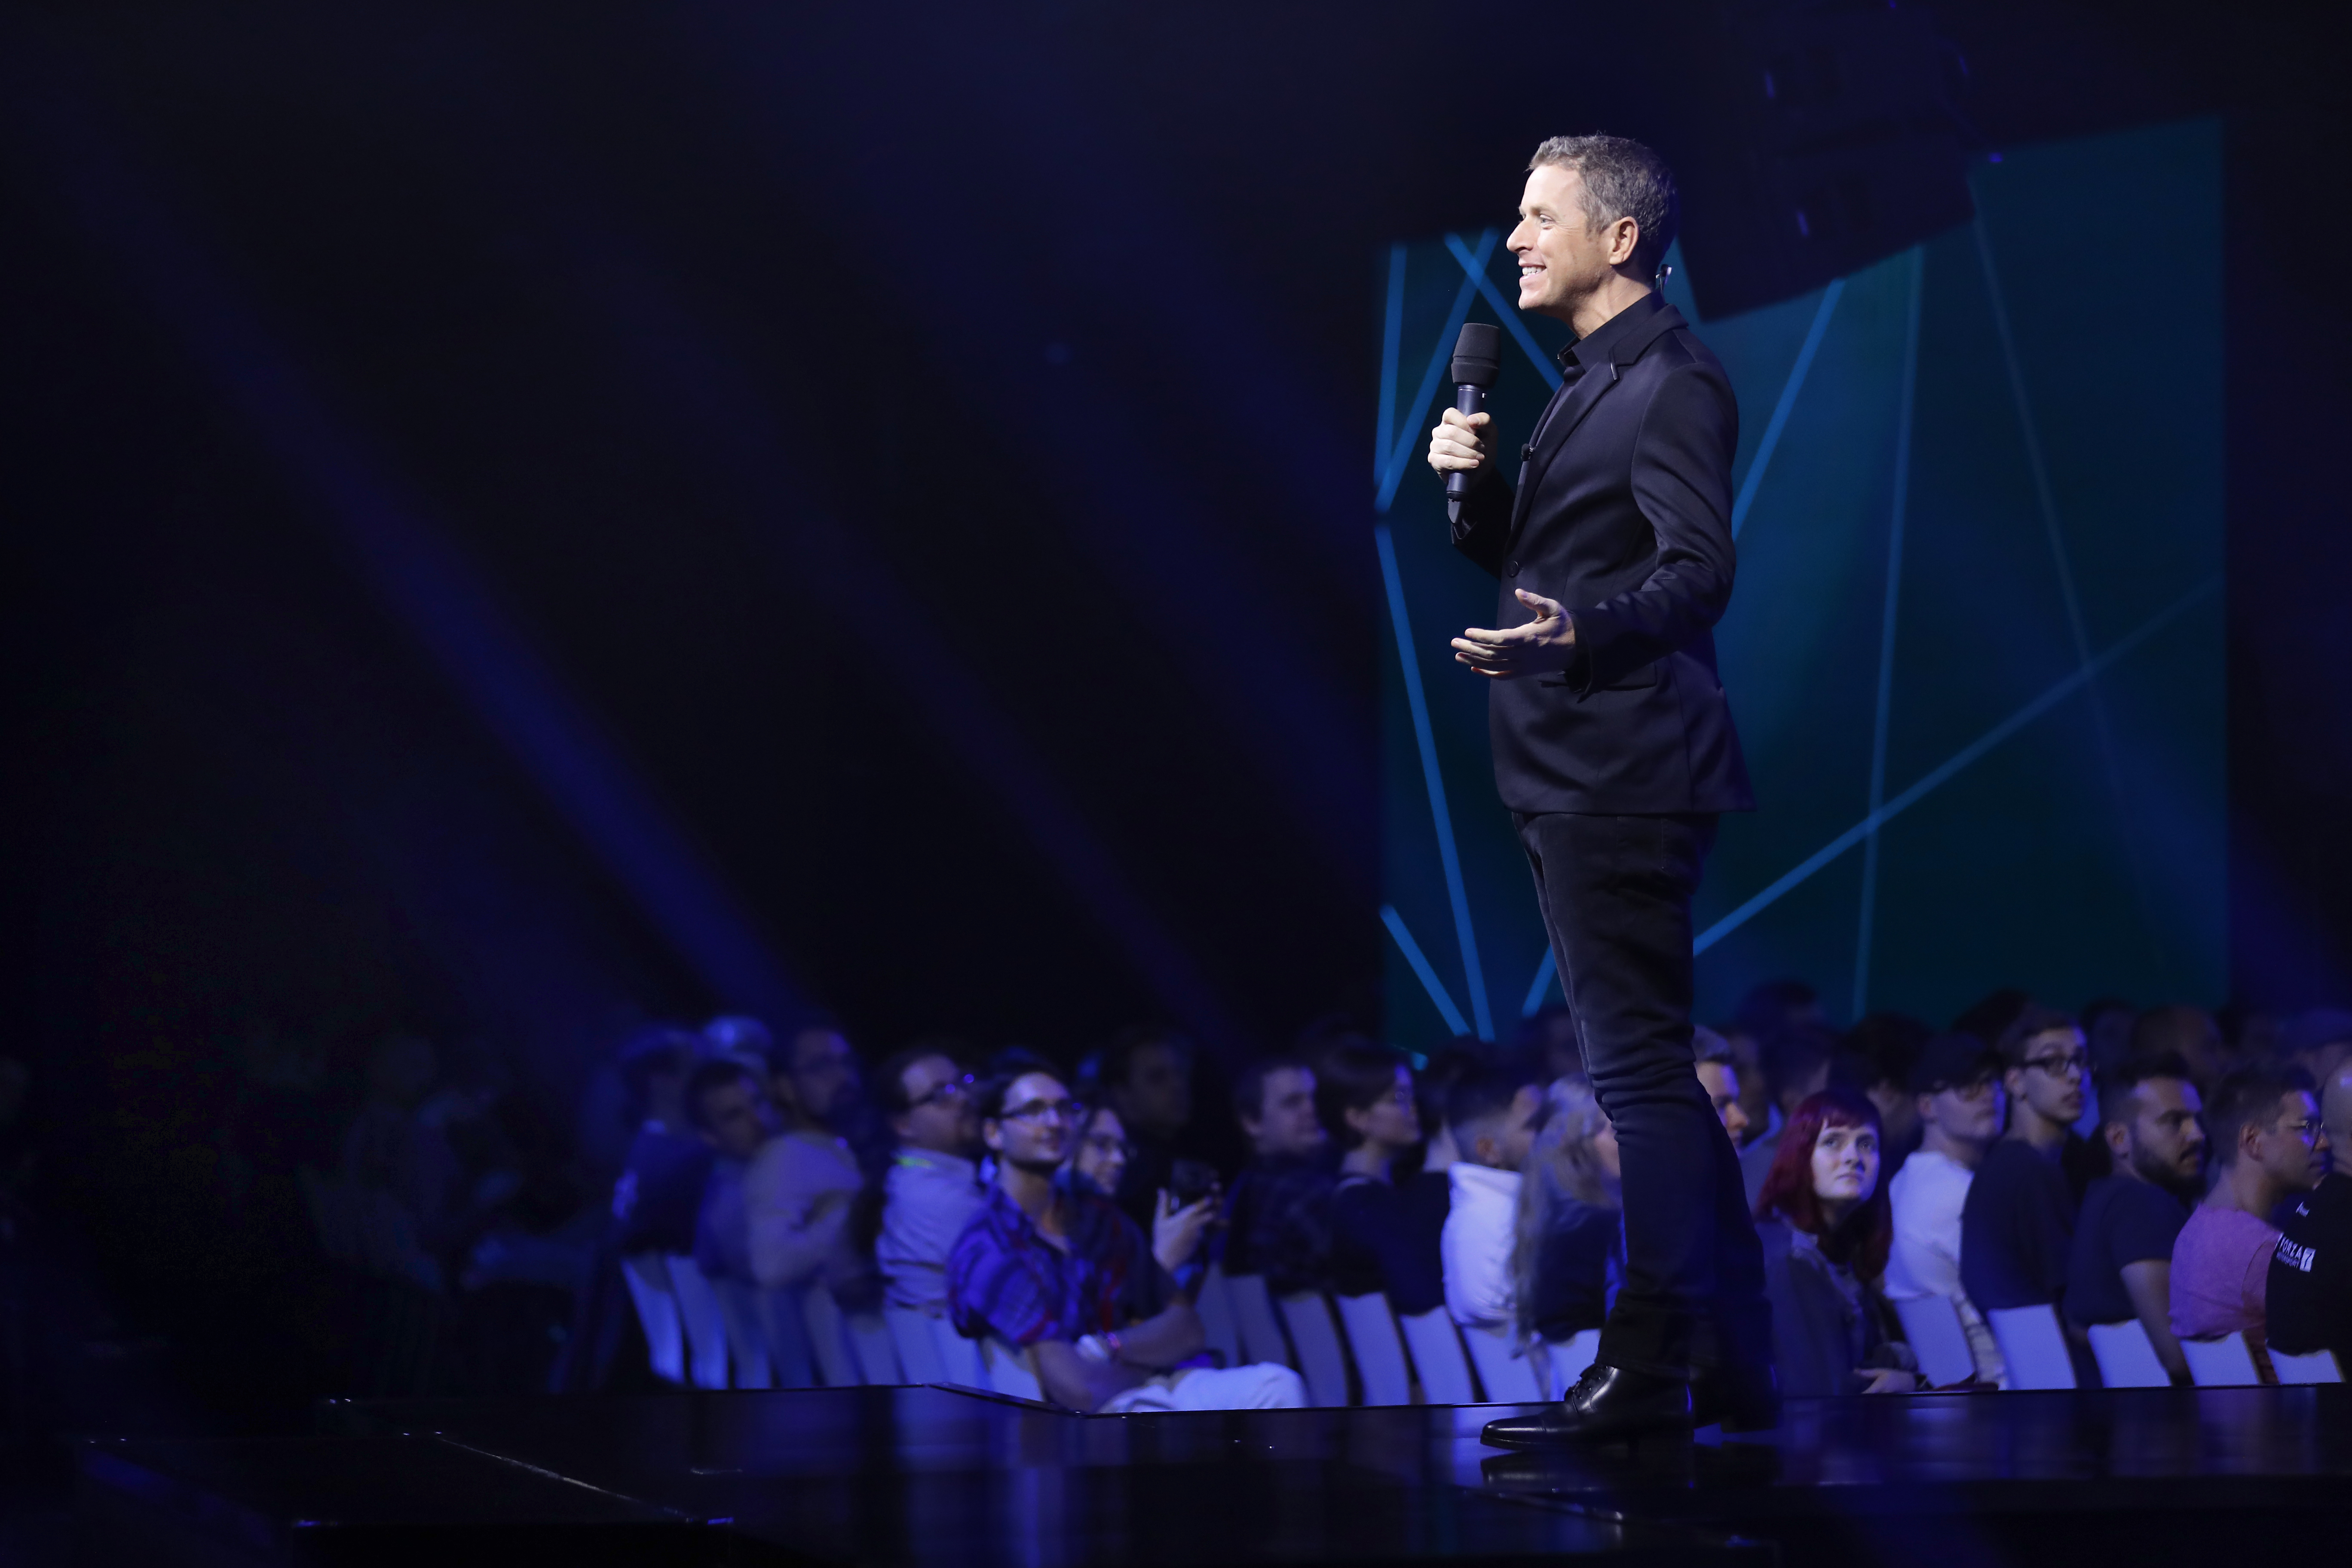 Geoff Keighley presents on stage during the Gamescom 2019 opening night in Cologne, Germany